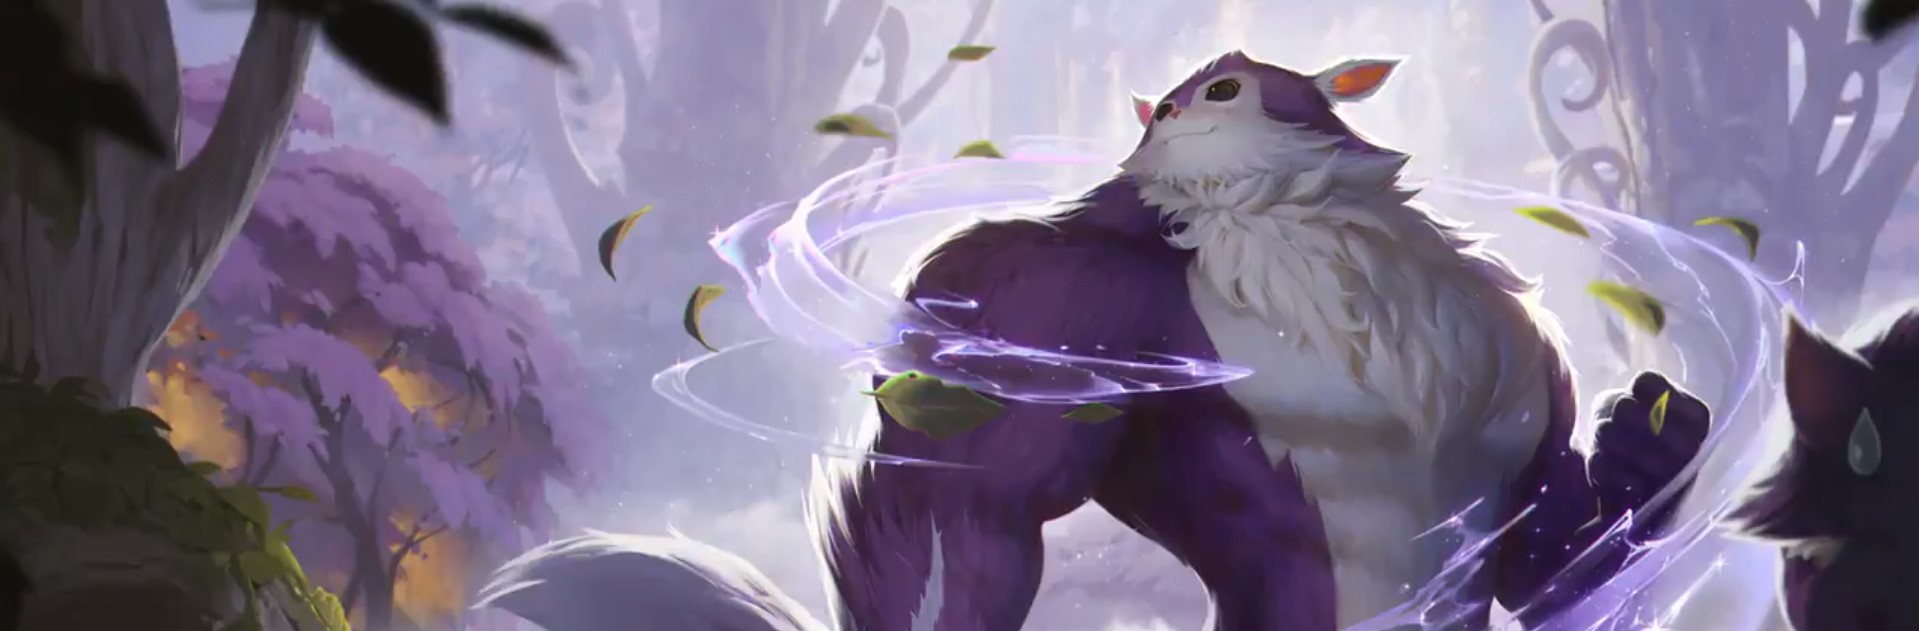 Call of the Mountain Card Spoilers: Ionia (Tasty Faefolk, Swole Squirrel, and More)